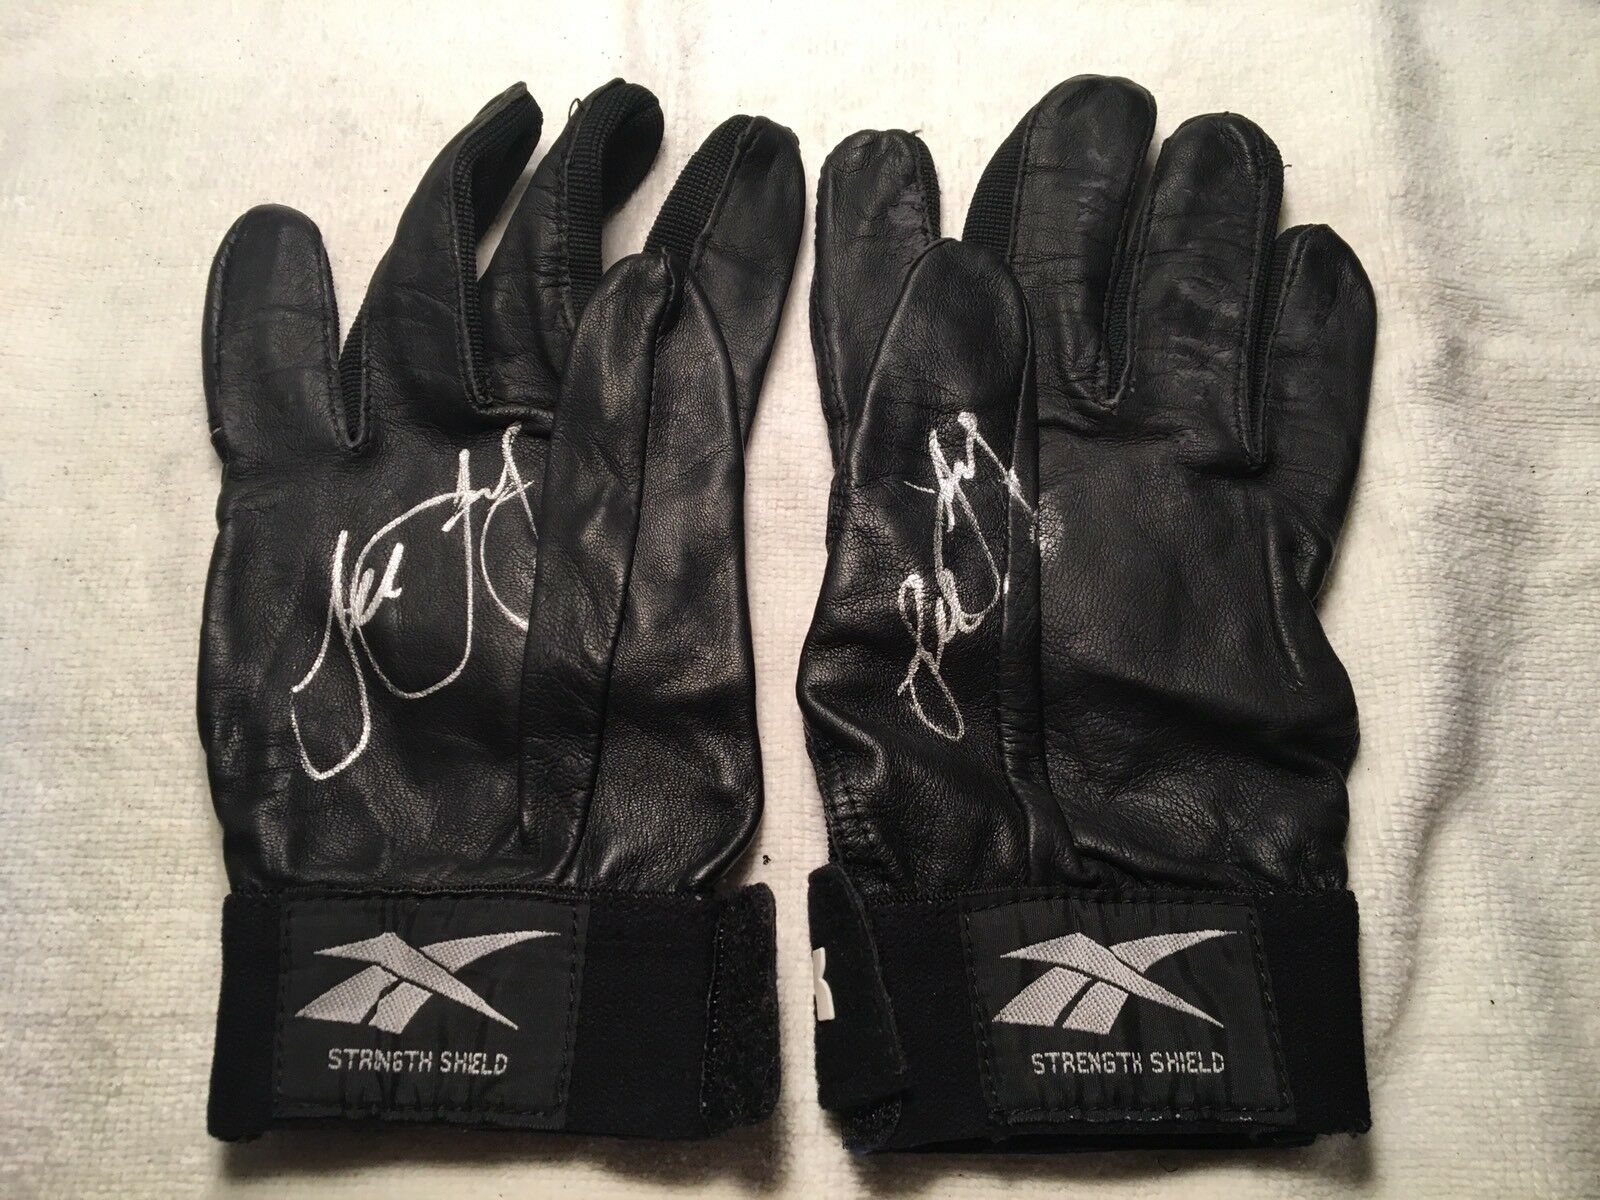 Lee Tinsley Signed Game Used Batting Gloves Boston Red Sox 90's Mlb